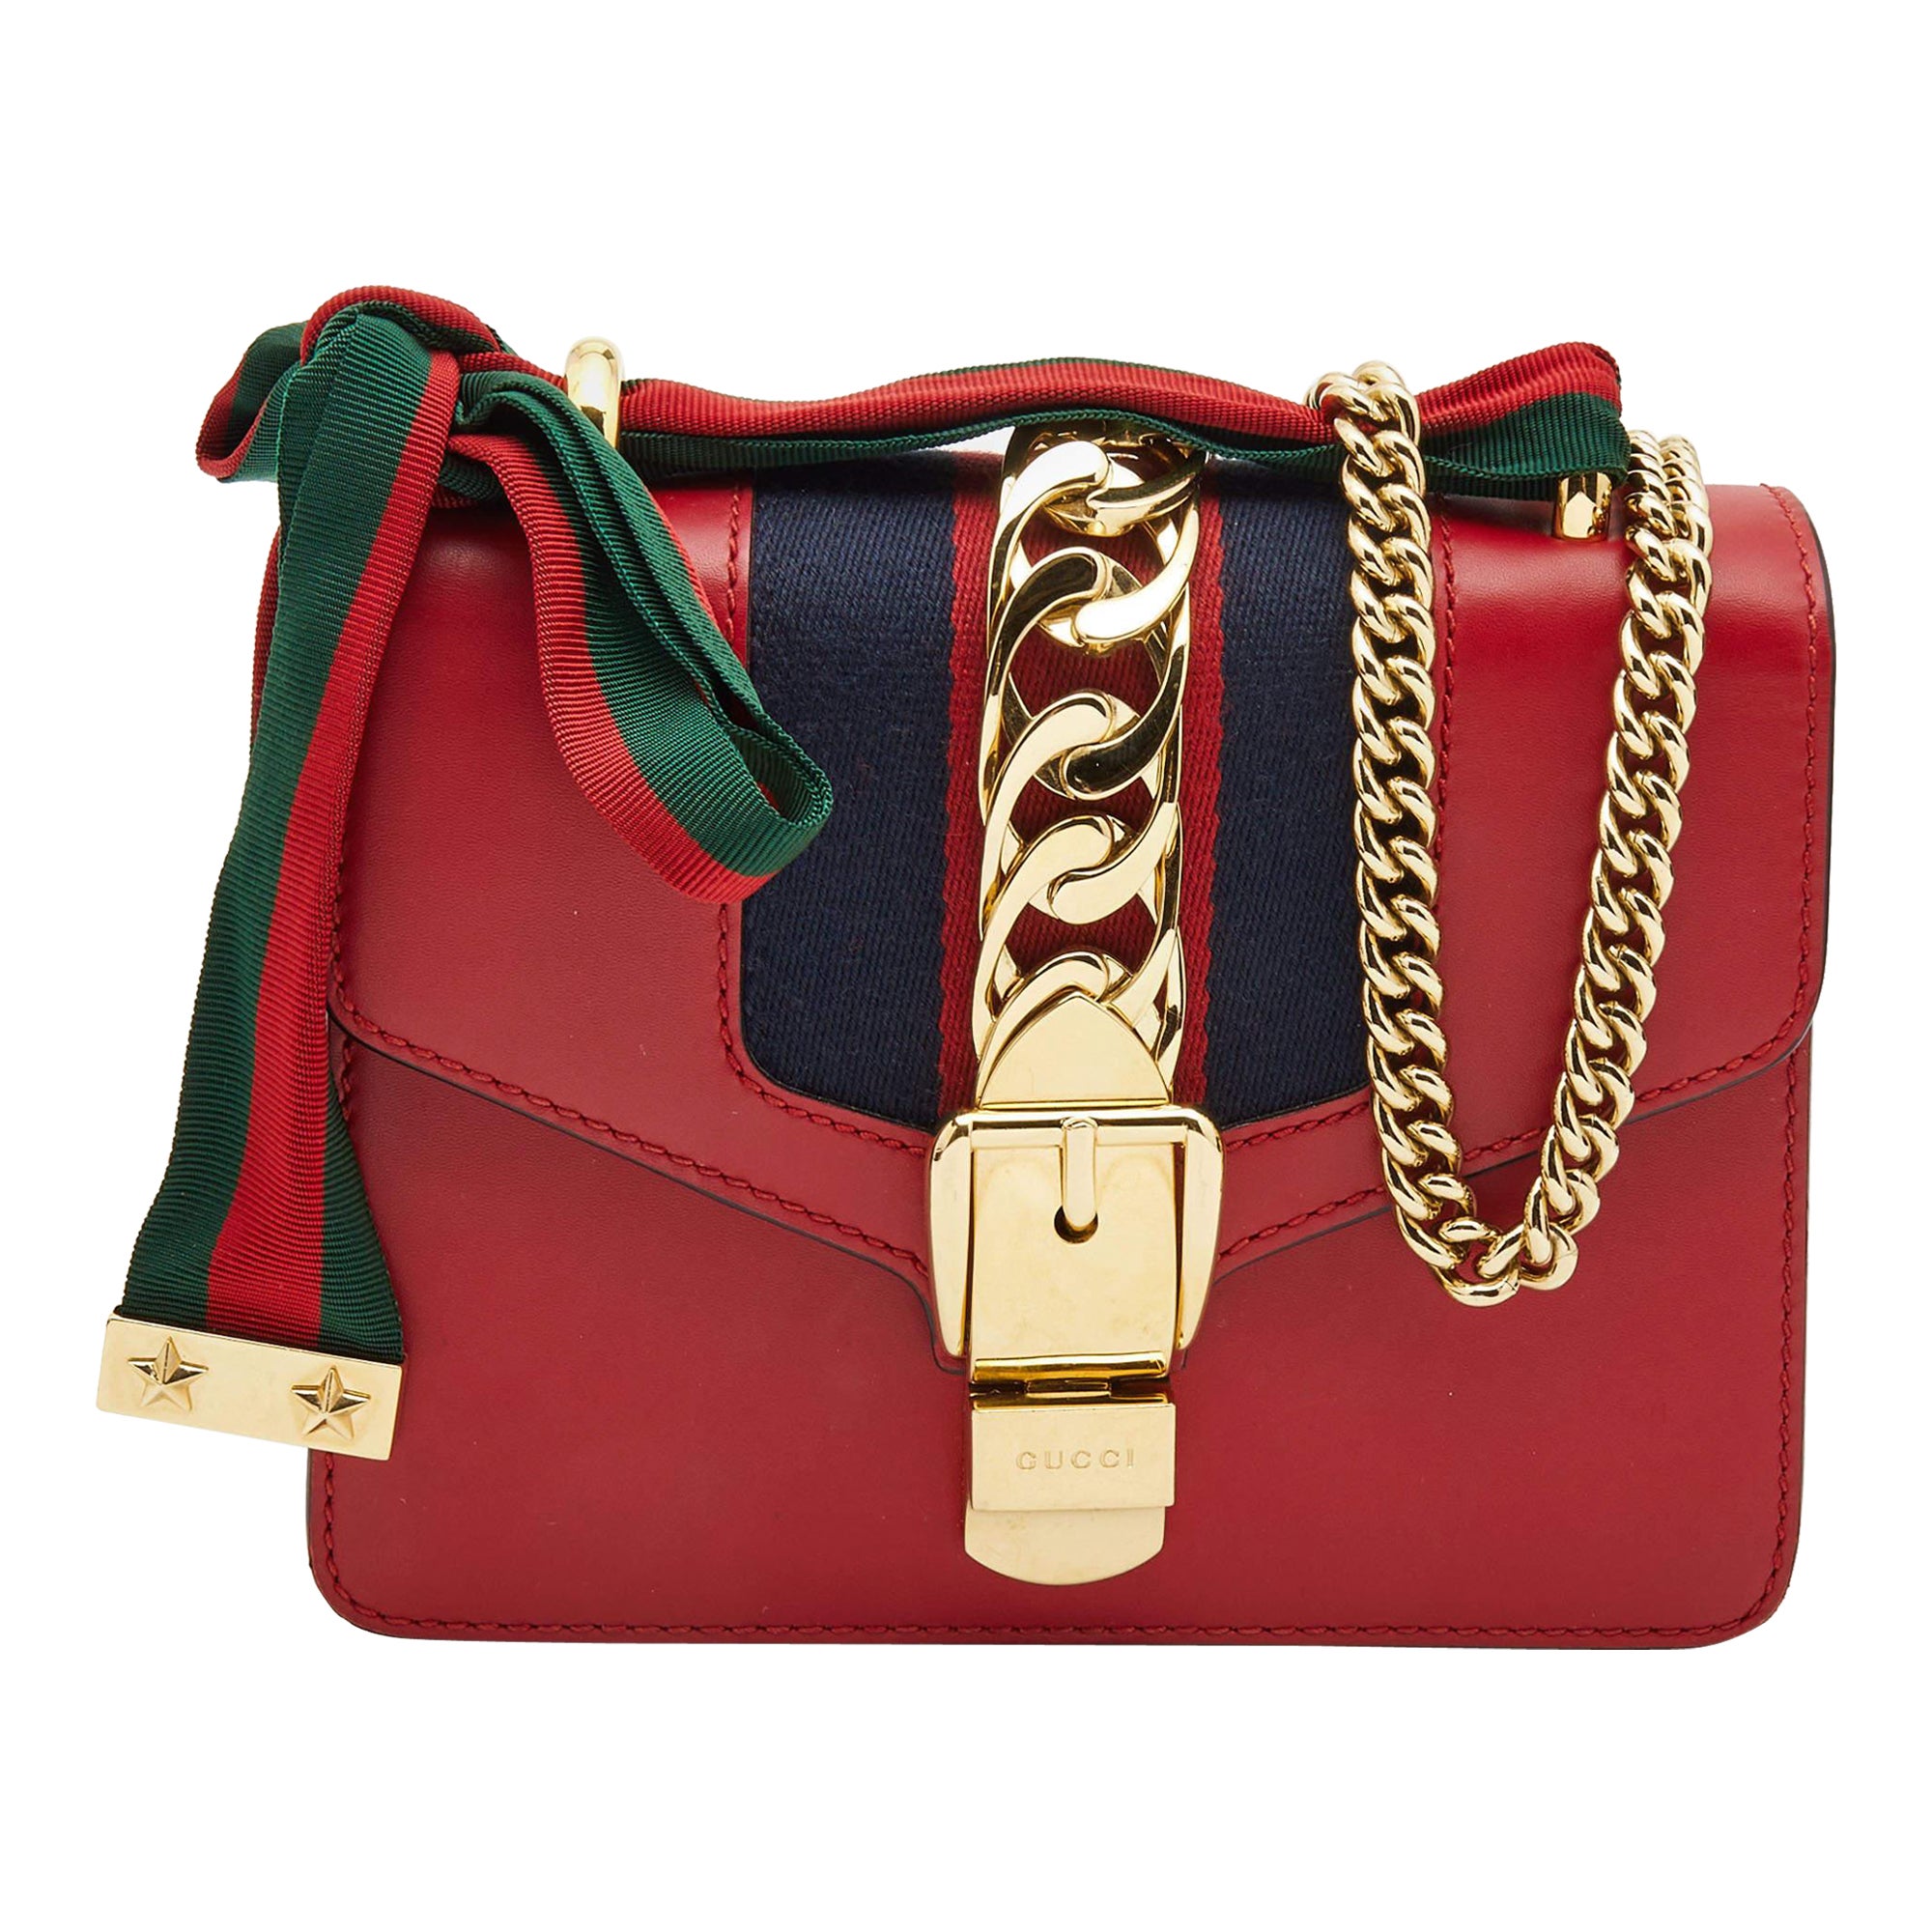 Gucci Jackie 1961 in red leather question : r/handbags